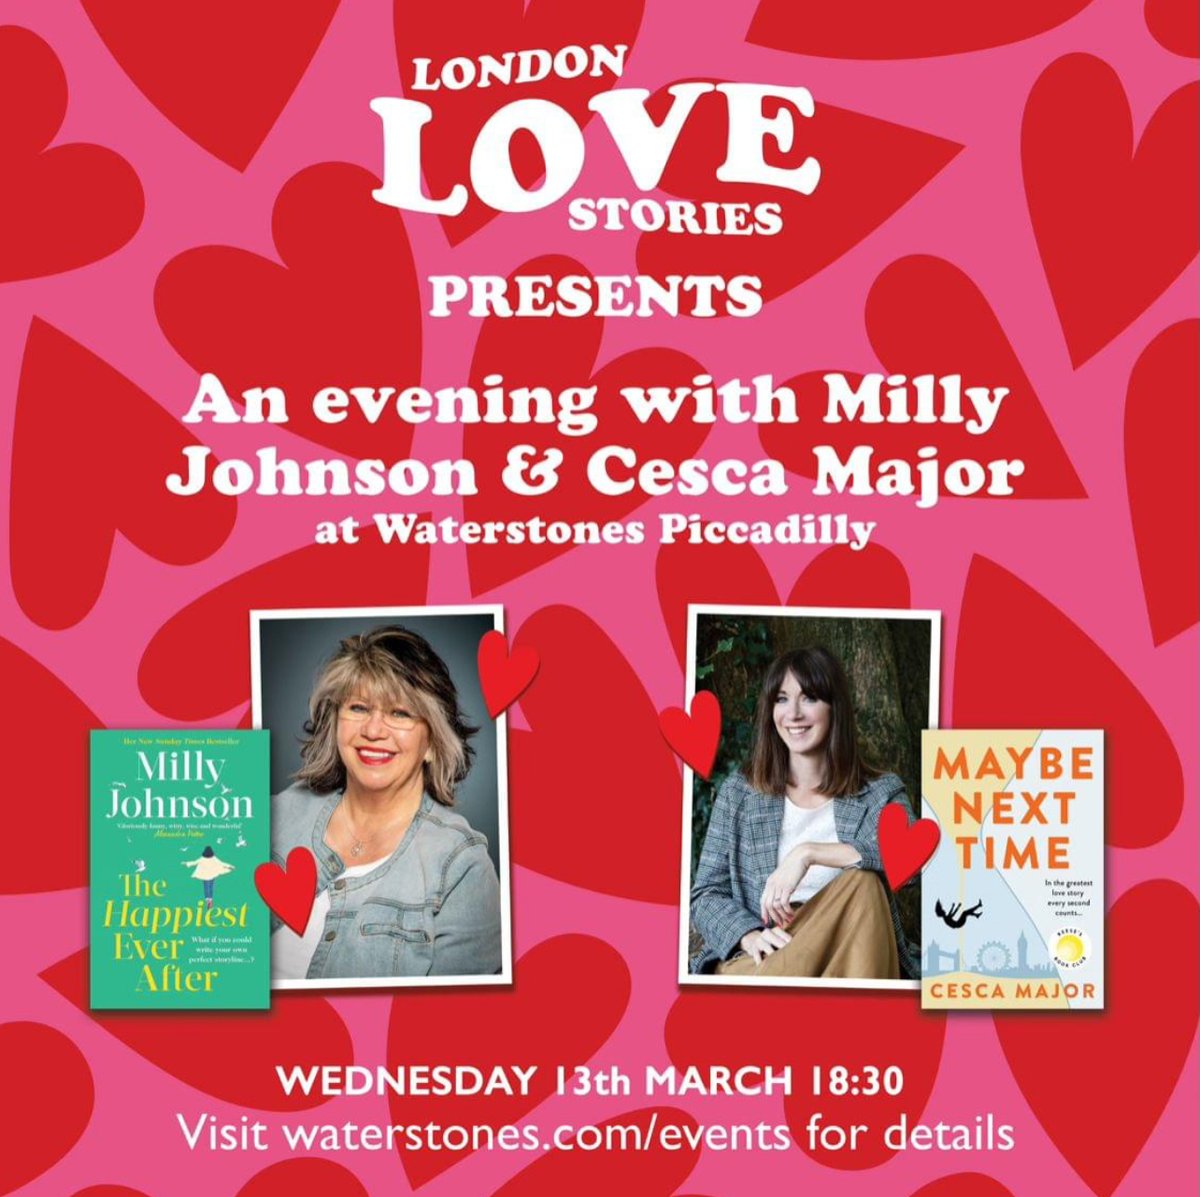 In two days this is happening and I don't often get to do events in London (and you can guarantee on Thursday someone will say 'When are you coming to London?') So I'm here with Cesca and it would be great if you could join us. And I hear there are goody bags...